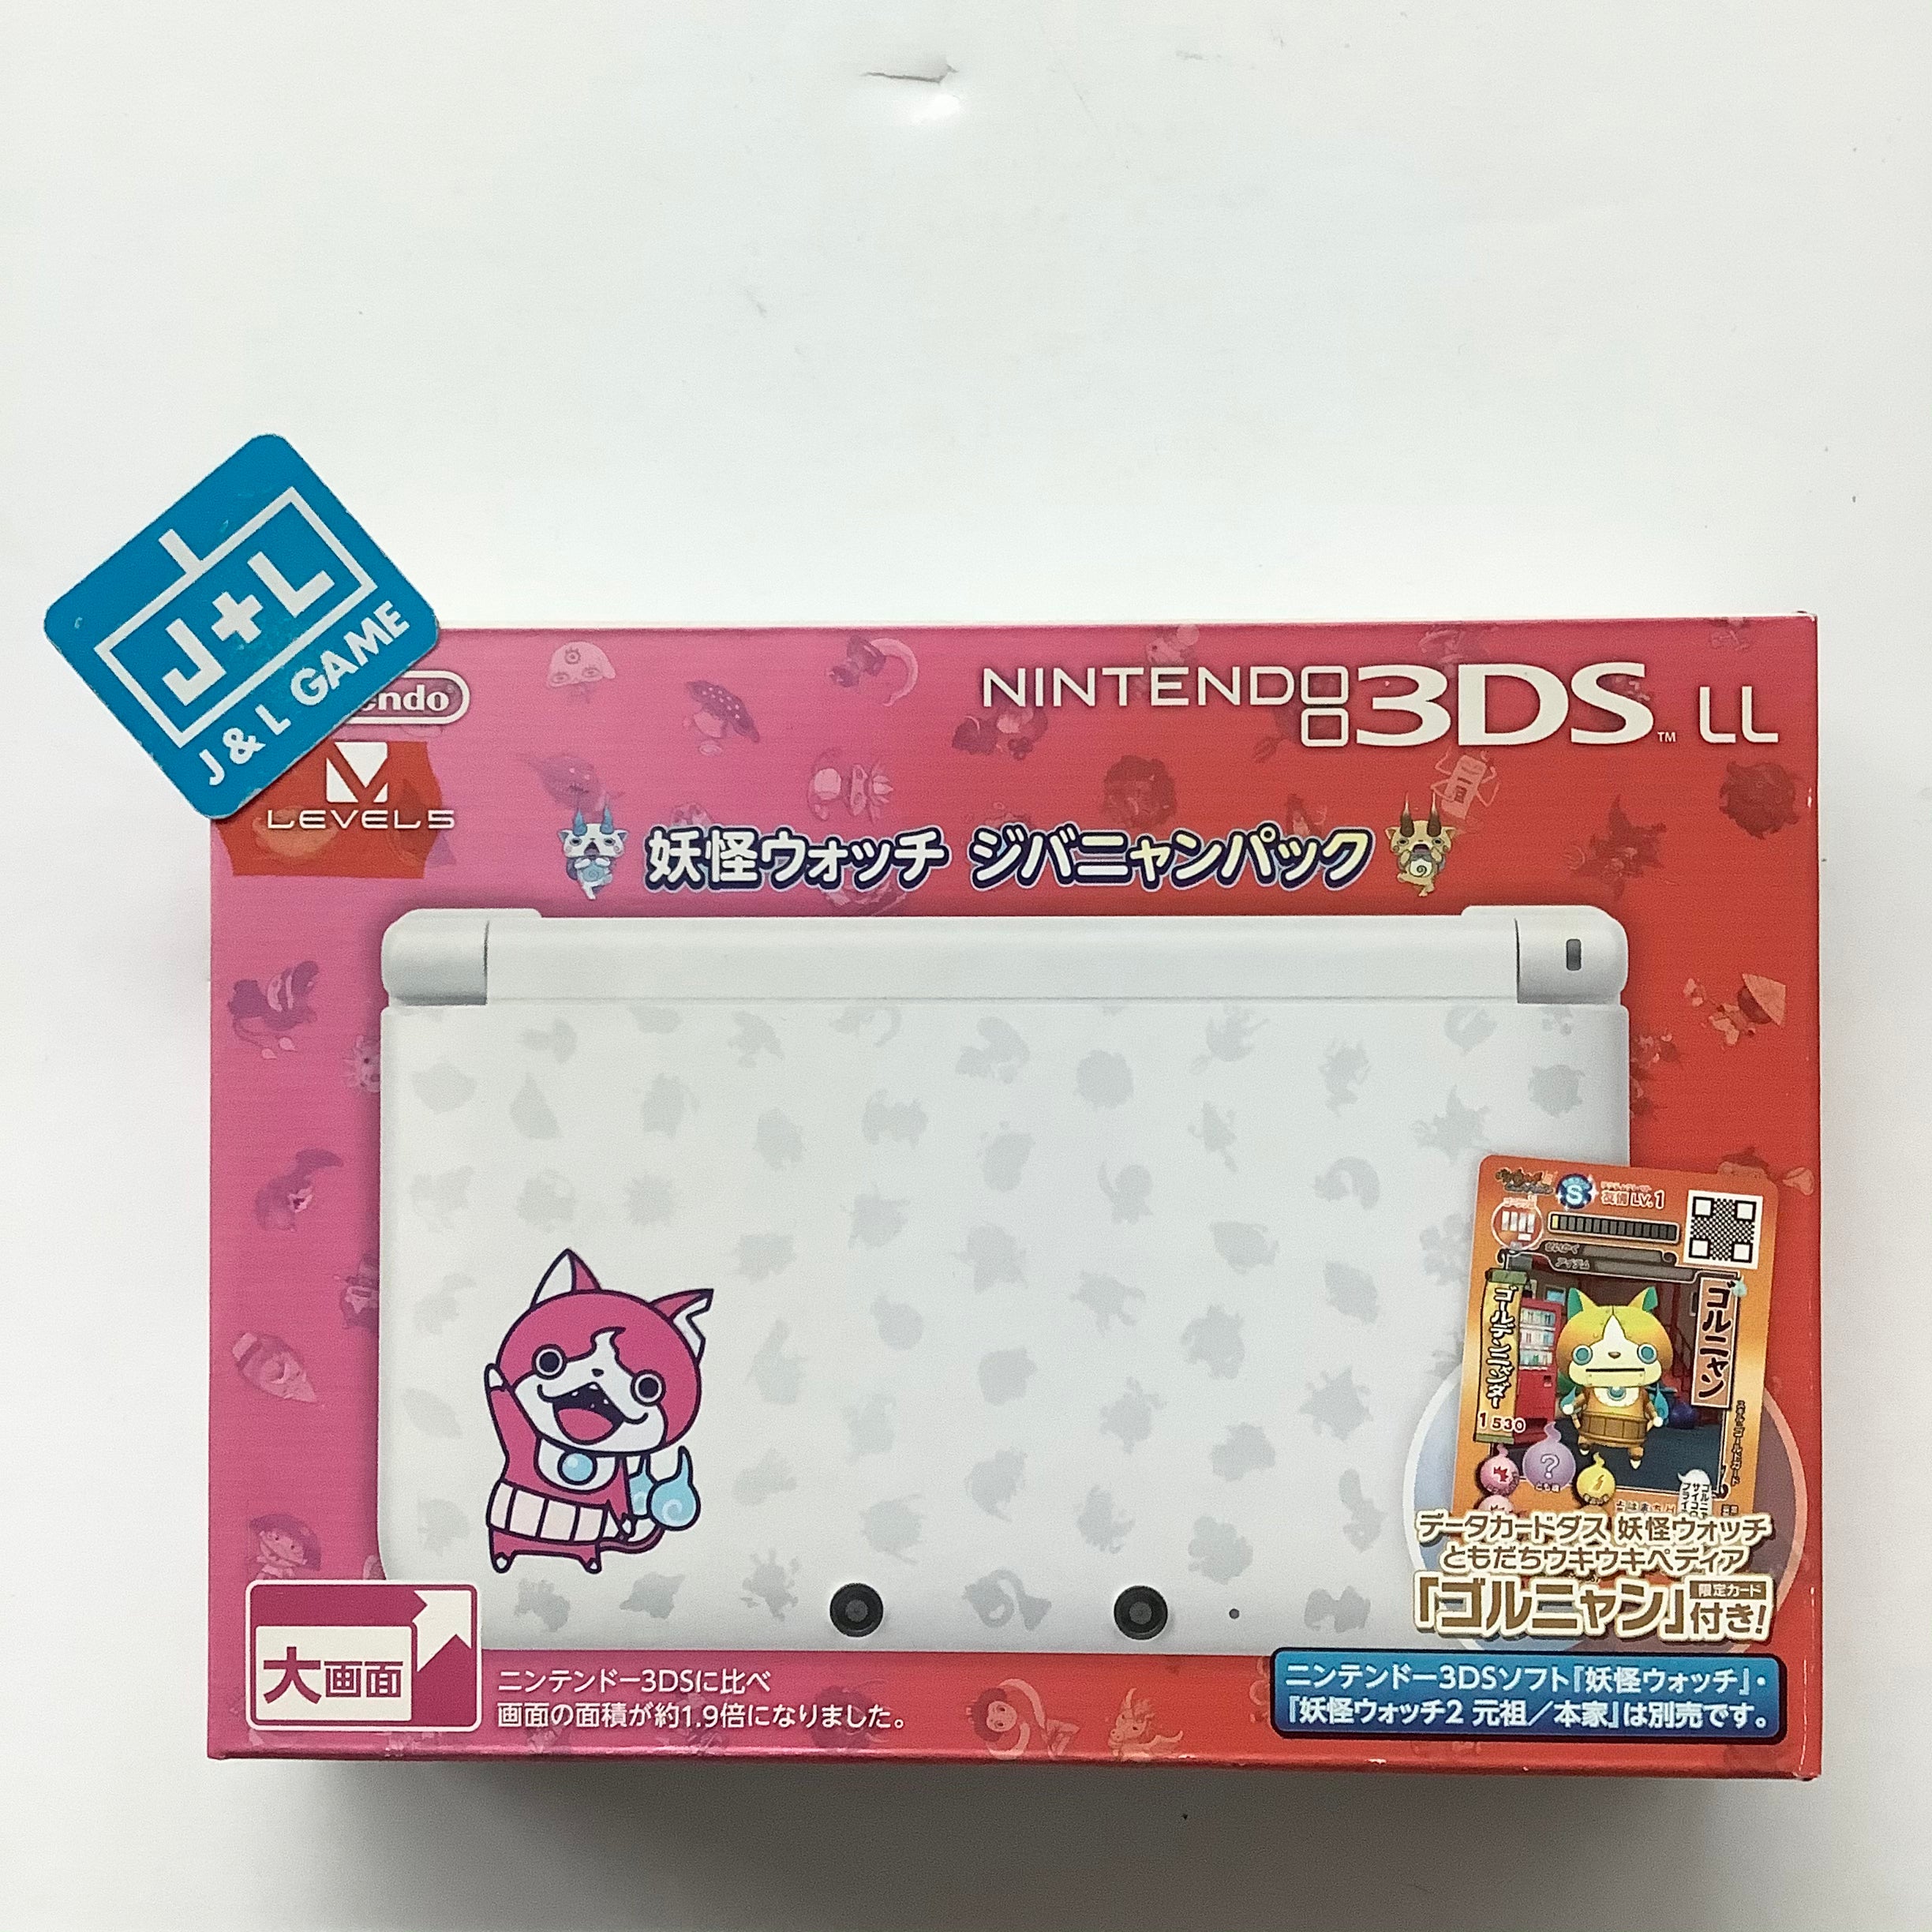 Nintendo 3DS LL Console Yokai Watch Ziba Nyan pack (Benefits: DCD Yokai watch friends excited Prices limited card "Gorunyan" included) -  Nintendo 3DS ( Japanese Import ) CONSOLE Nintendo   